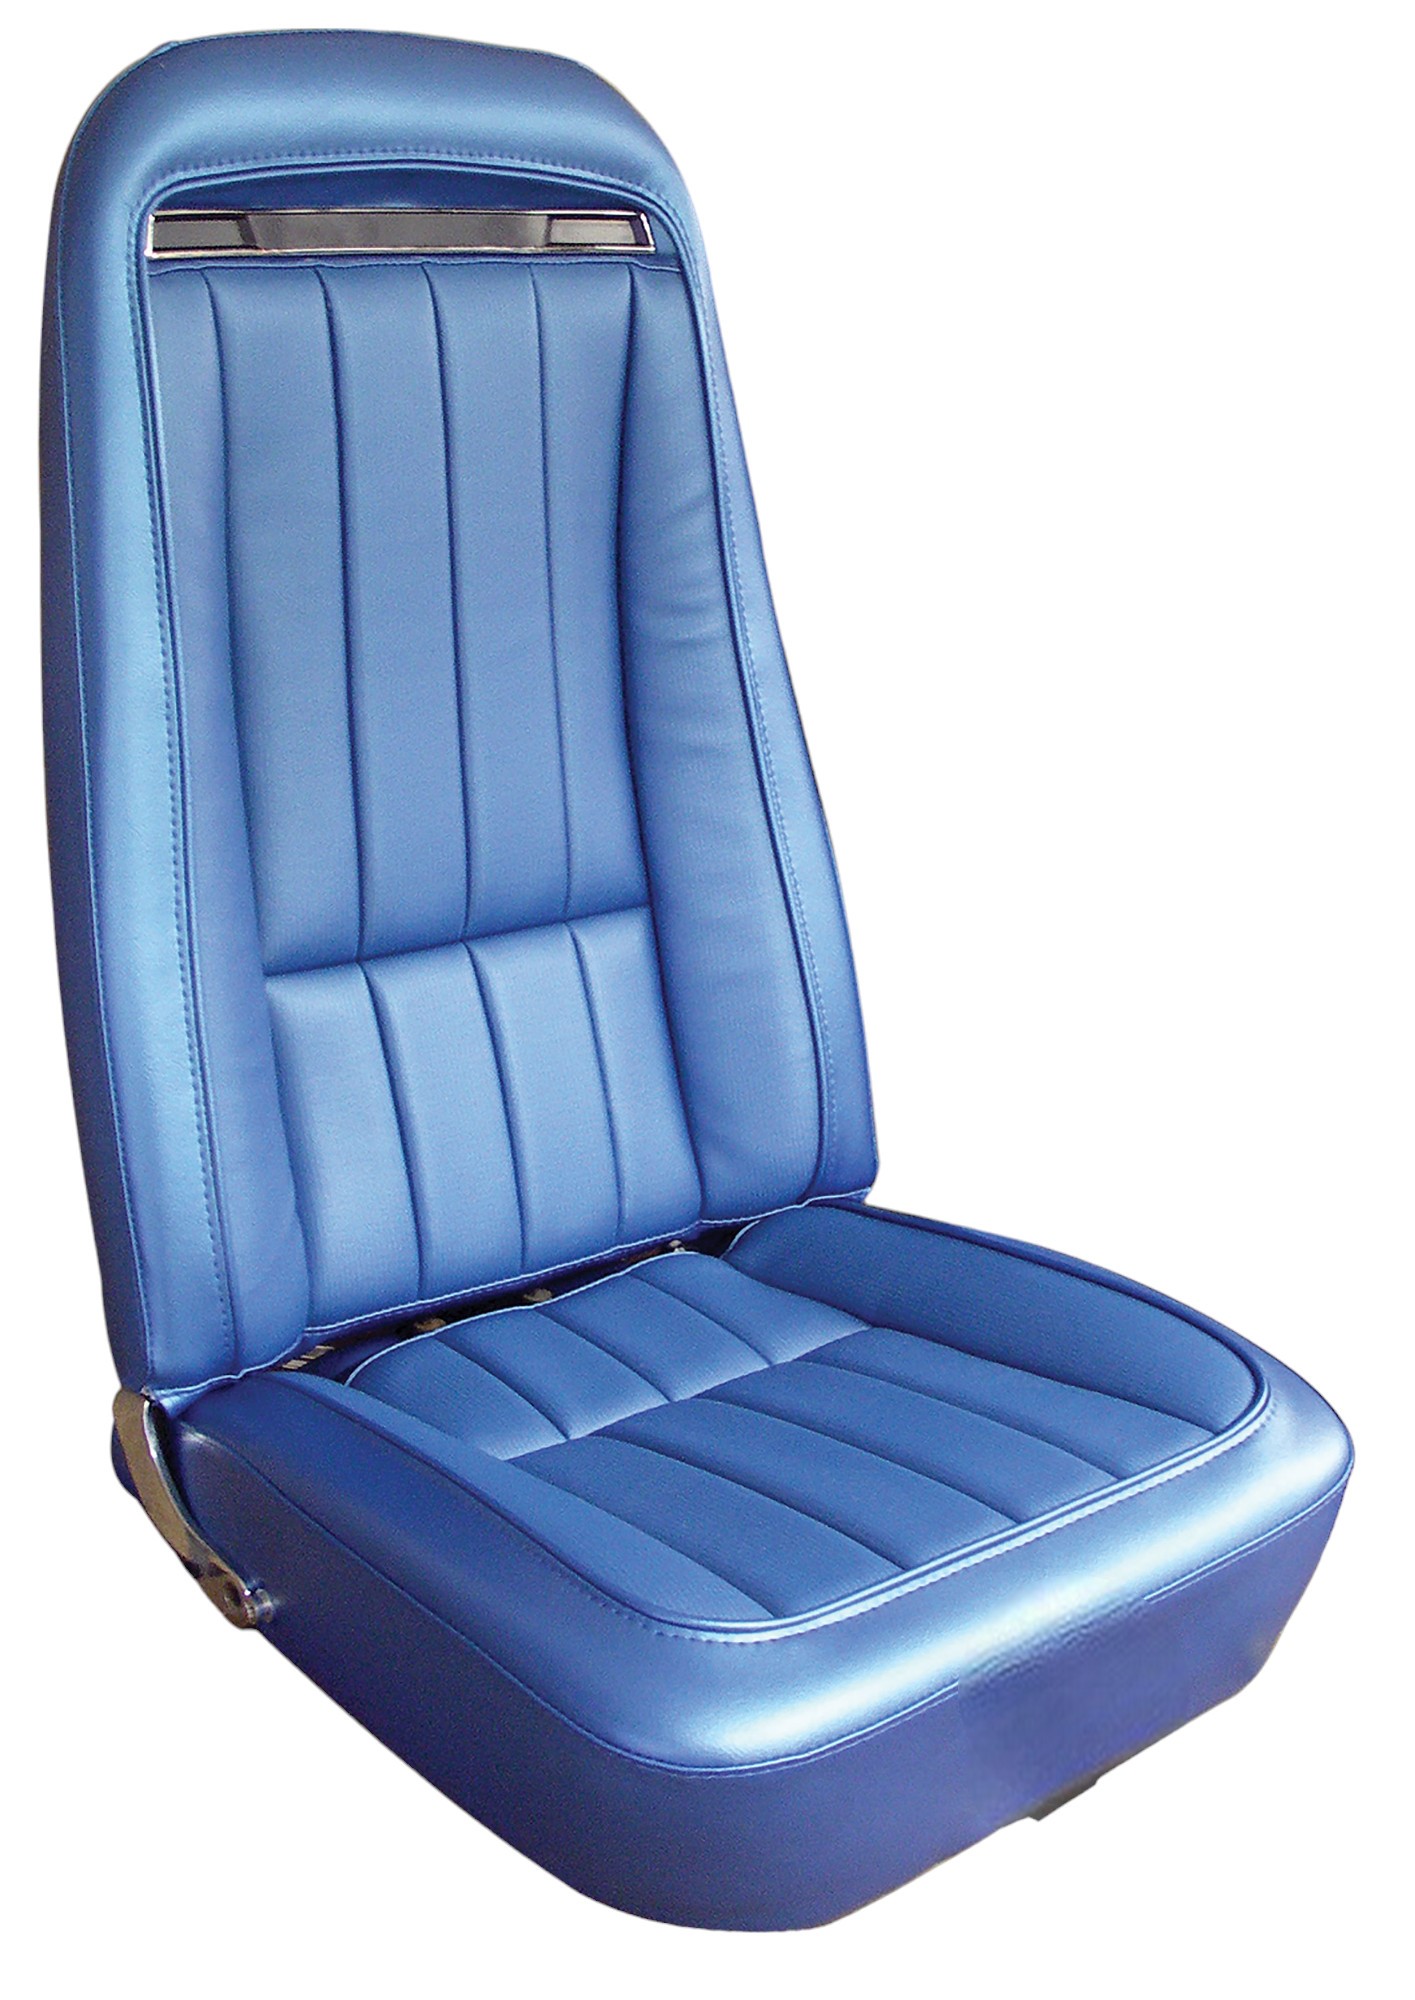 1970 C3 Corvette Mounted Seats Bright Blue "Leather-Like" Vinyl Without Shoulder Harness